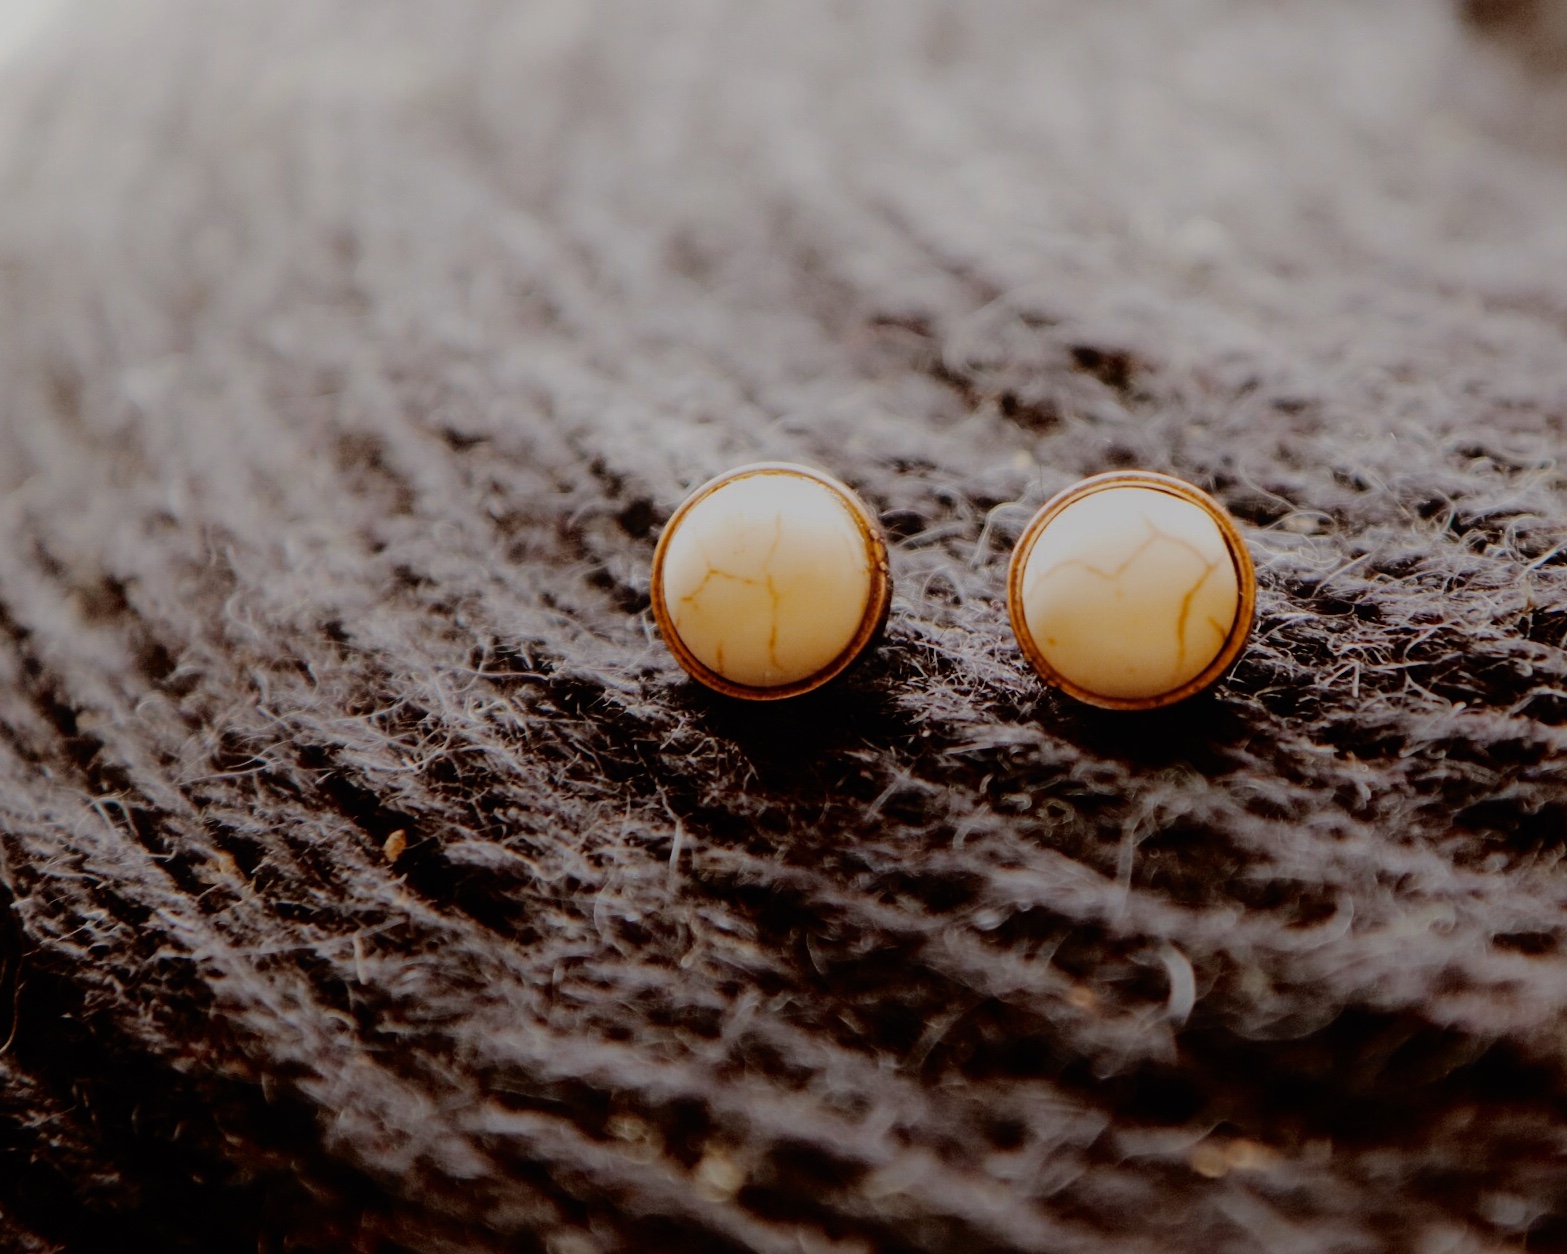 These adorable studs measure .25 inches in diameter!